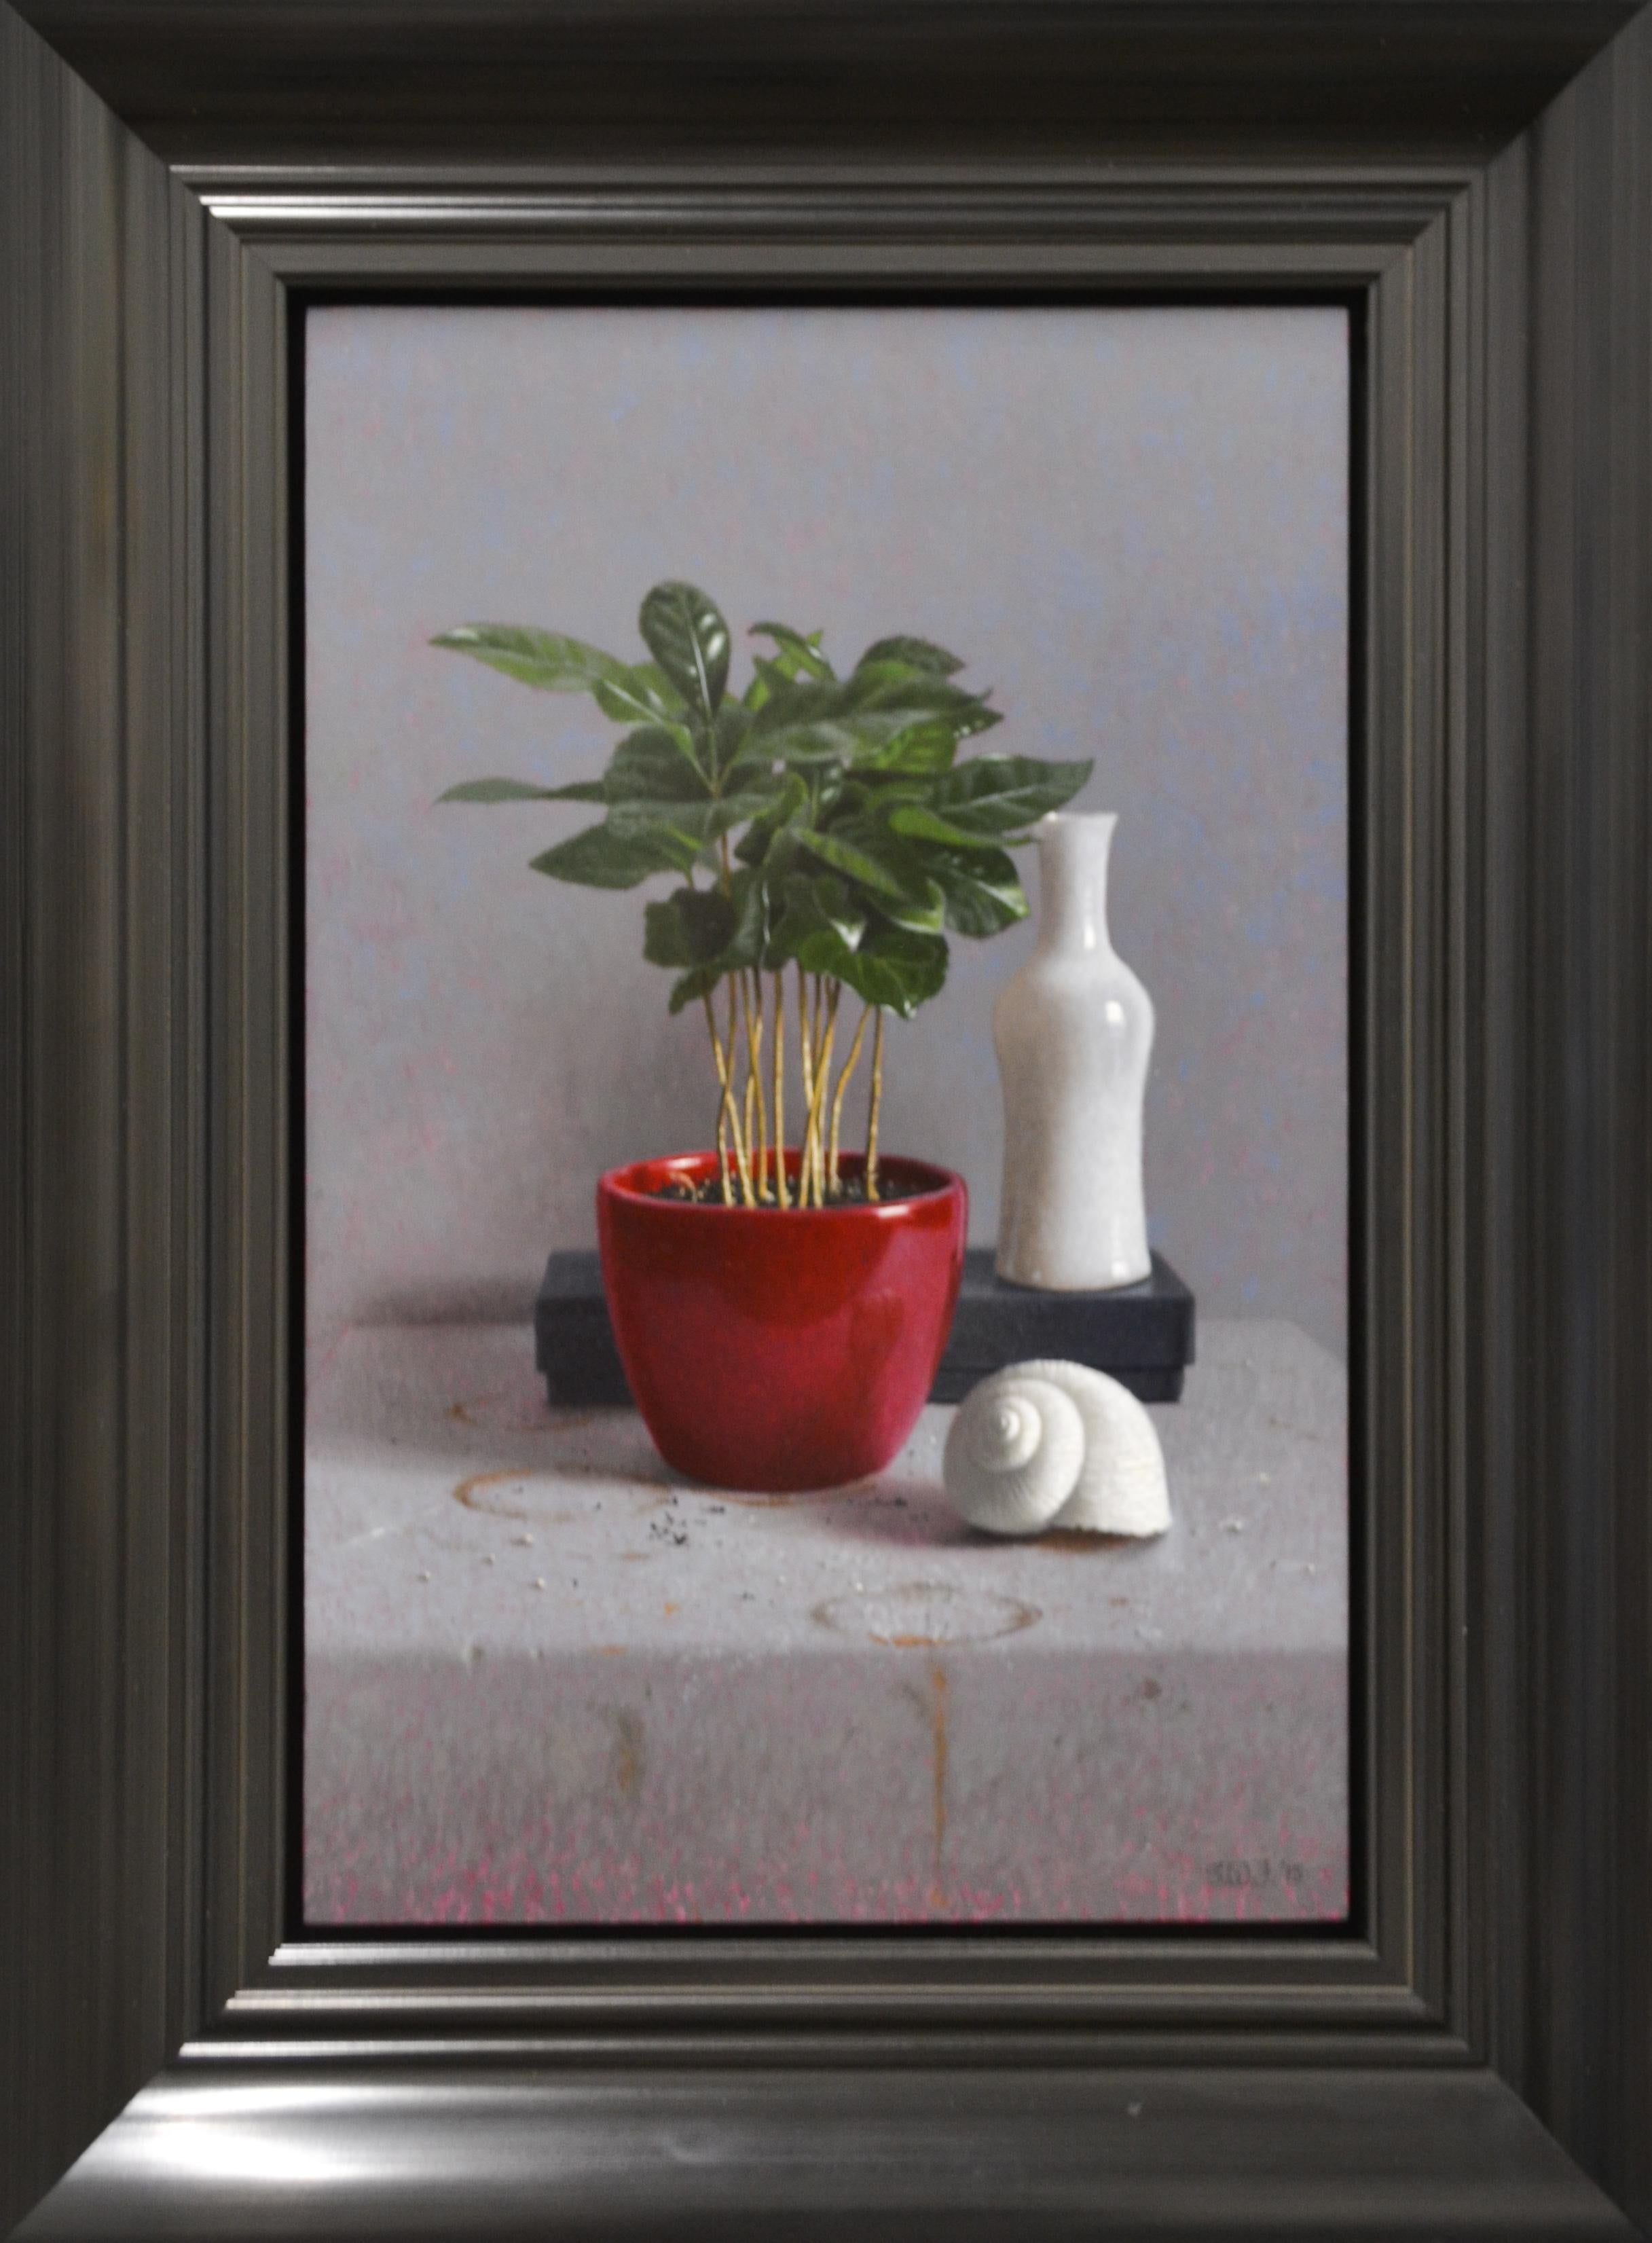 Since August 2018 Sietse W. Jonker belongs to the group of artists that we permanently represent in our stock-exposition. In mid-2019, this still-life artist will take part in a group exhibition devoted to still life in painting. His work can be